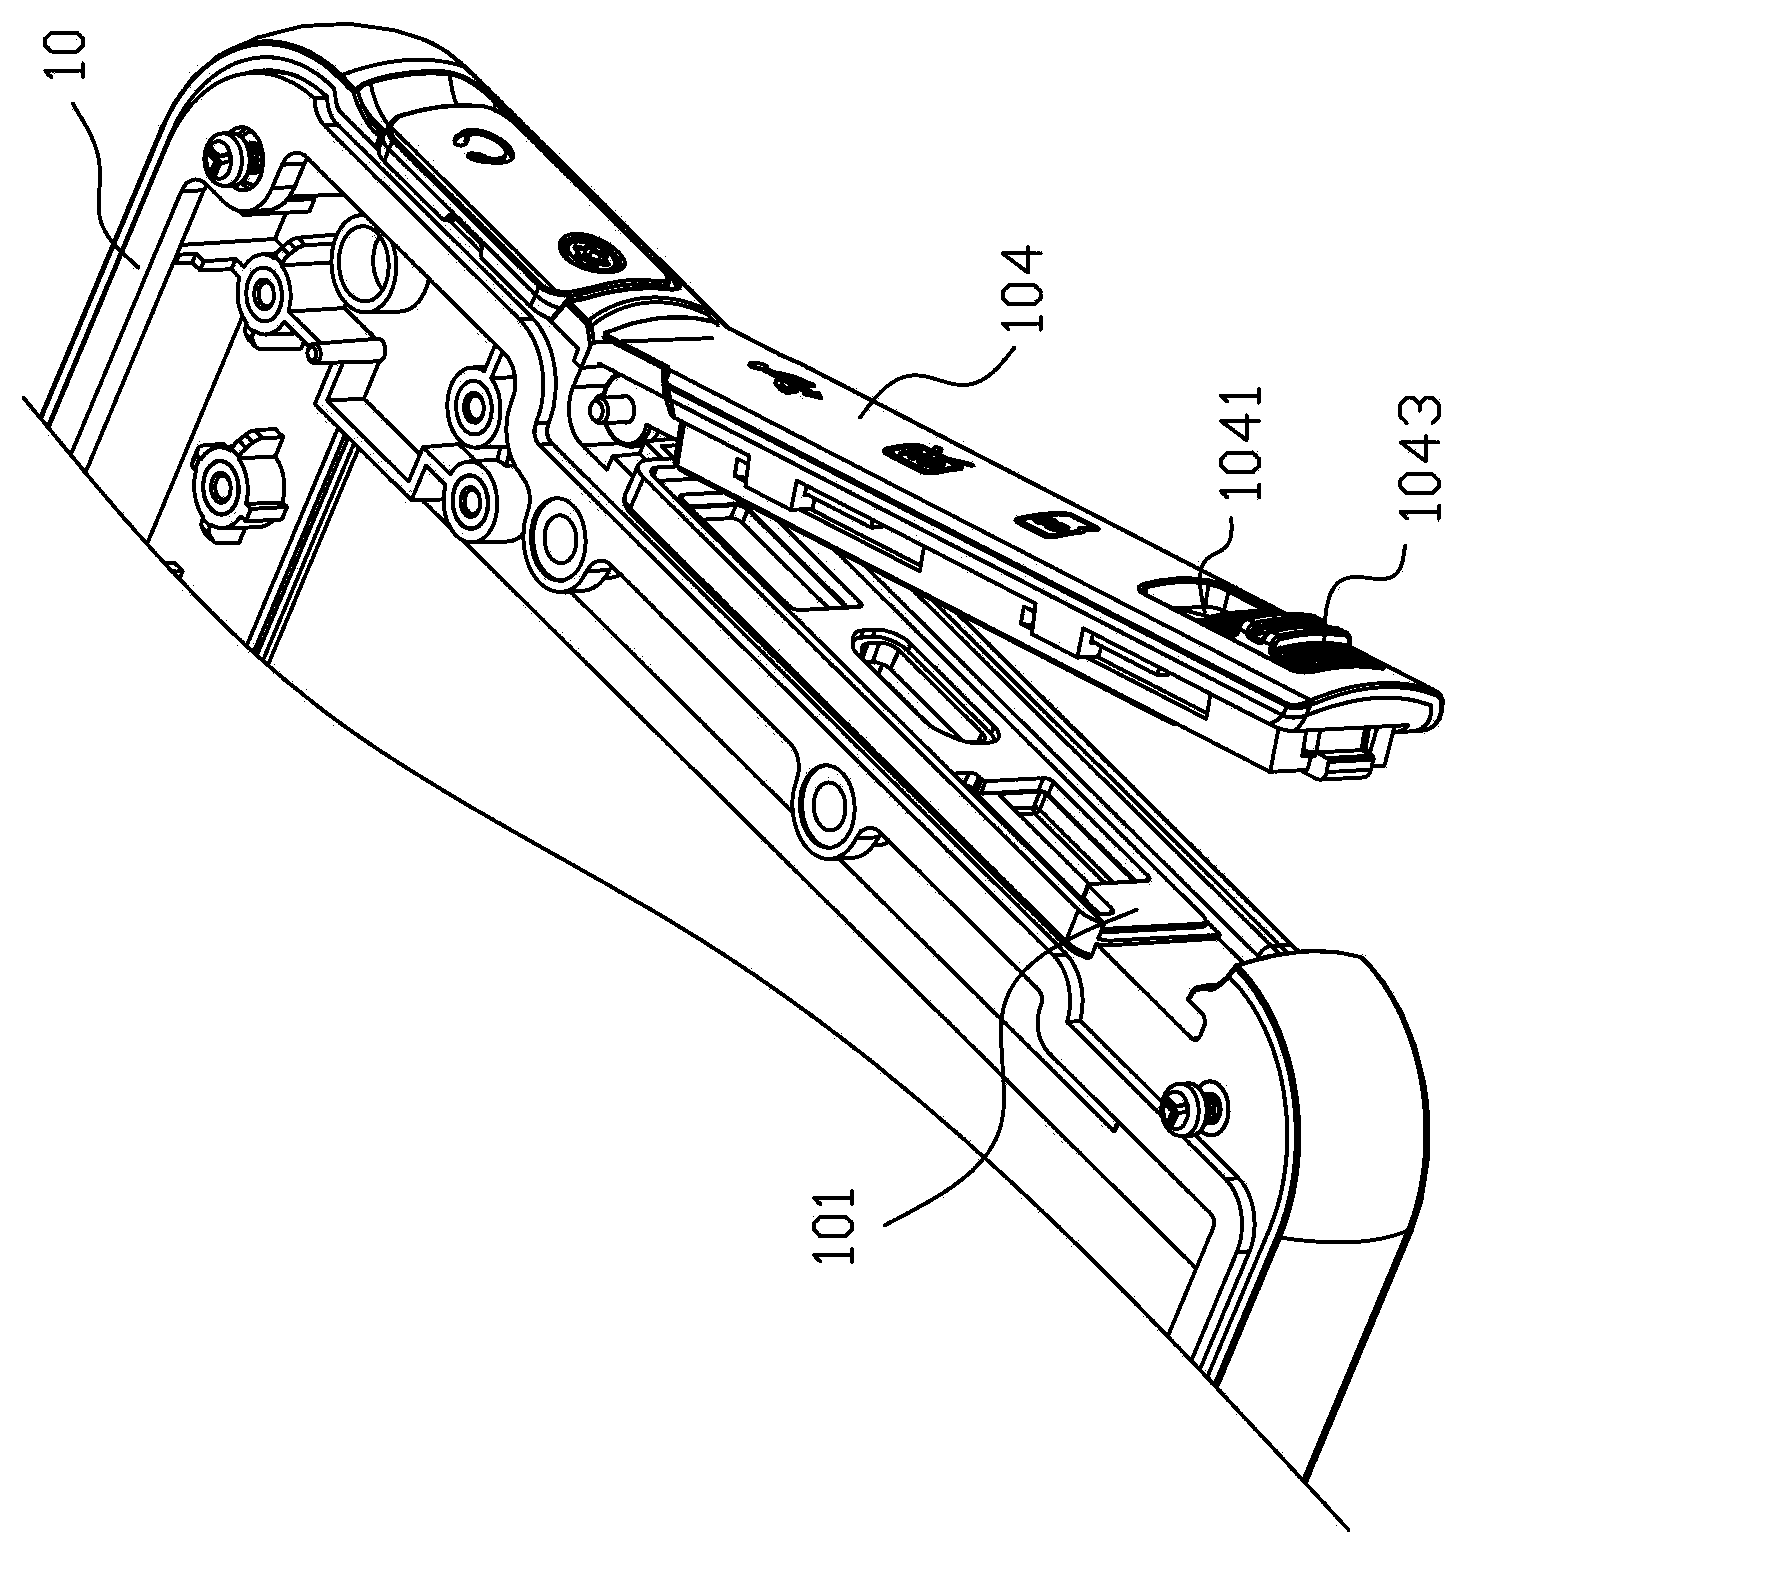 Sliding interface cover plate structure